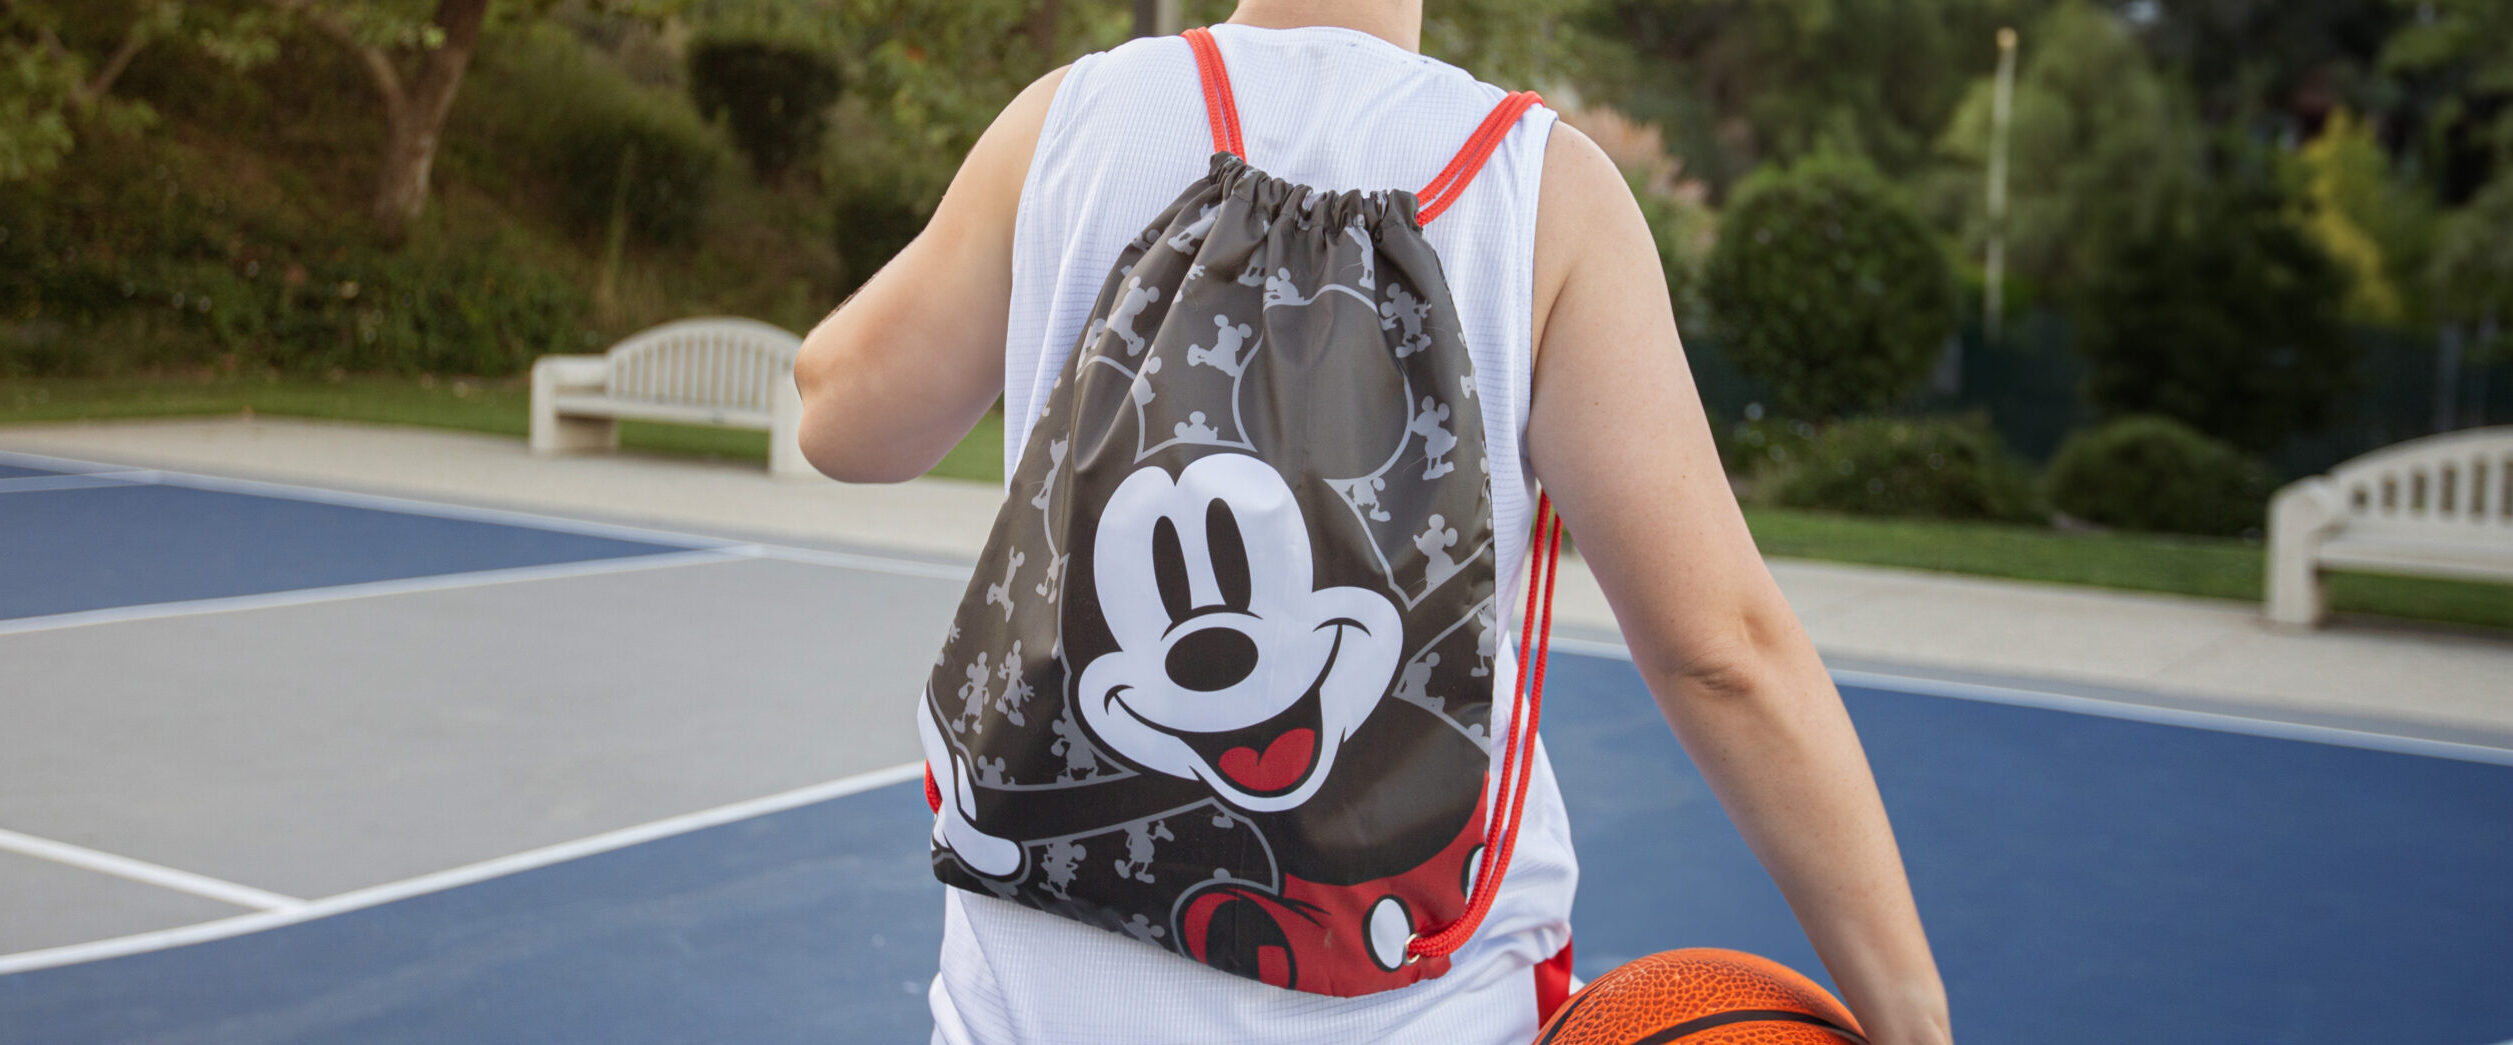 Man wearing a Mickey Mouse cinch bag at a basketball court